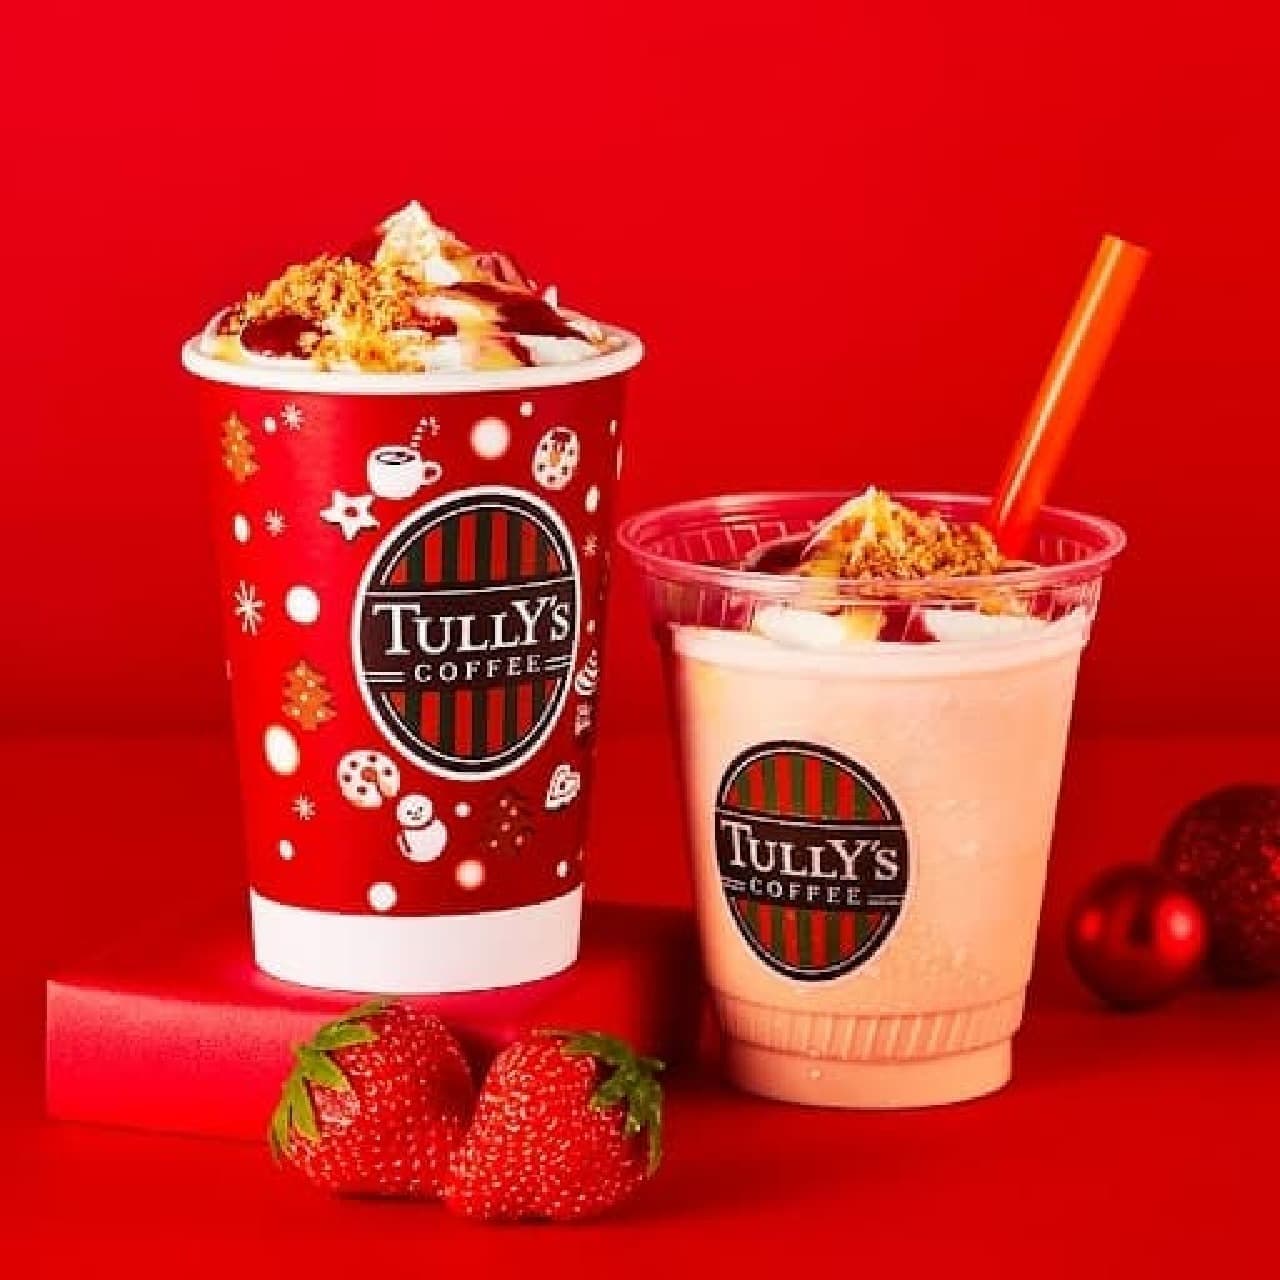 Tully's "Strawberry Millefeuille Royal Milk Tea